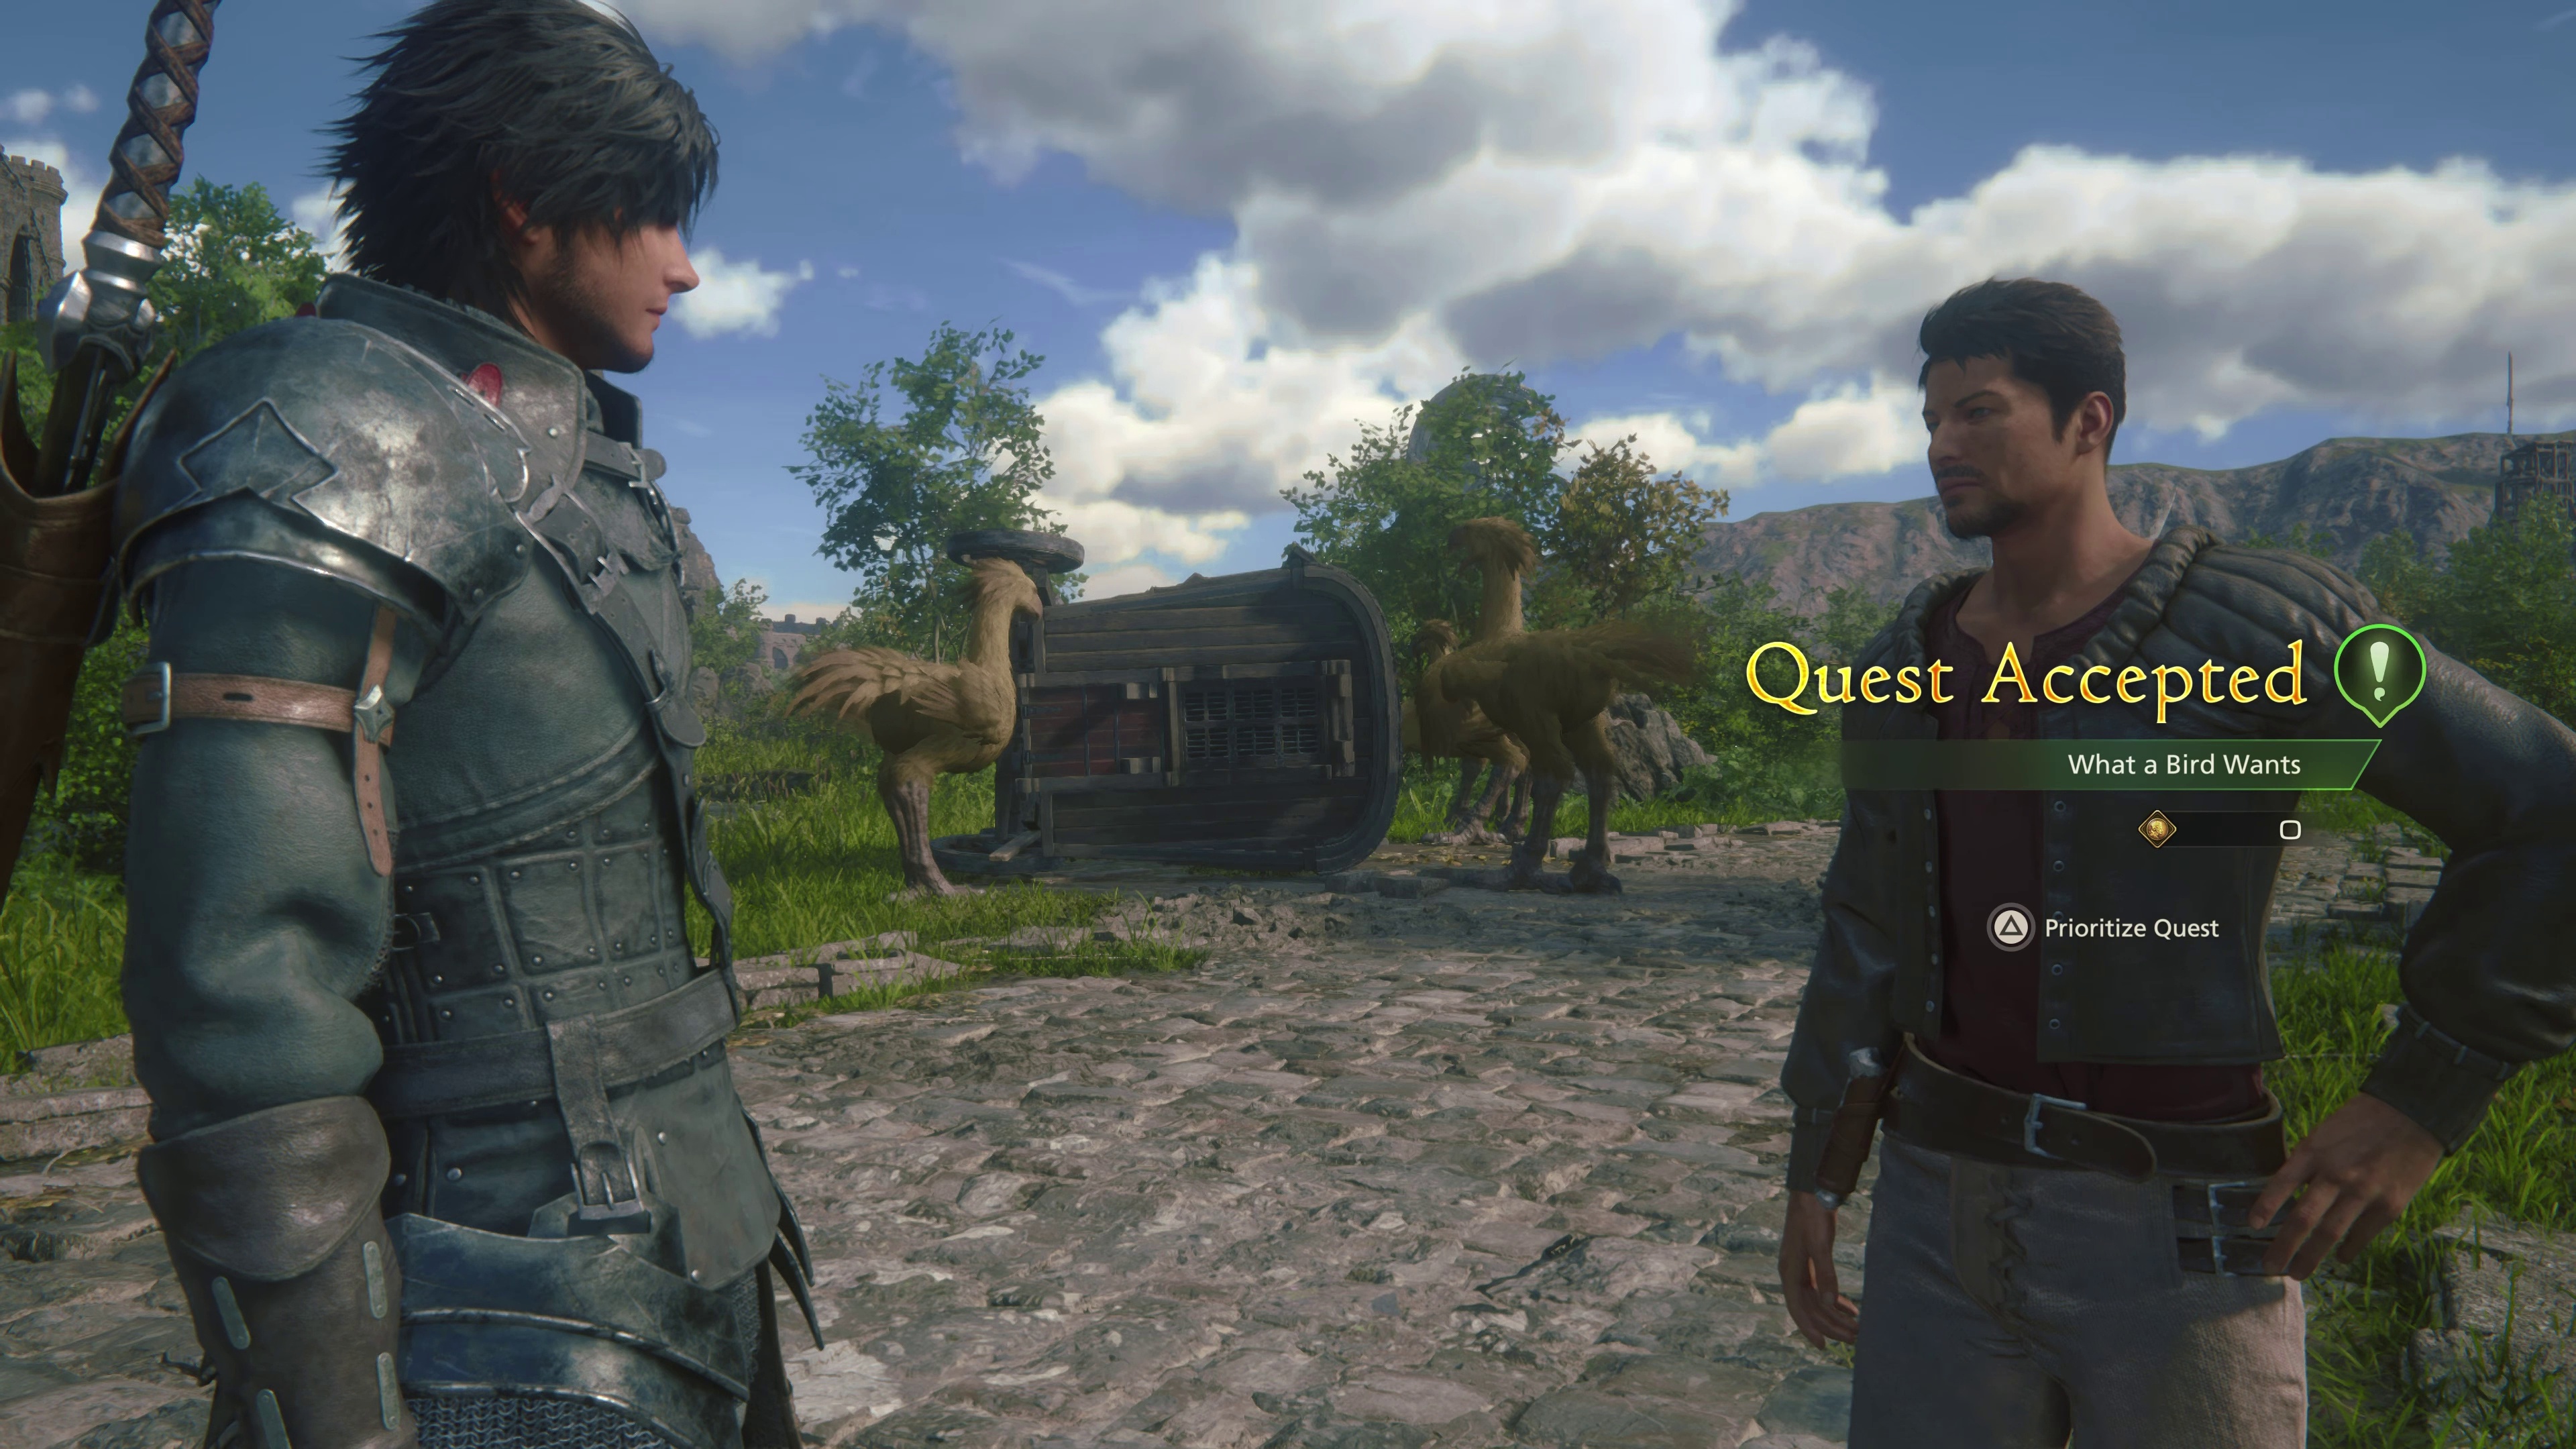 (In the more open part of the game, many side quests await, which you can take on, but don''t have to.)